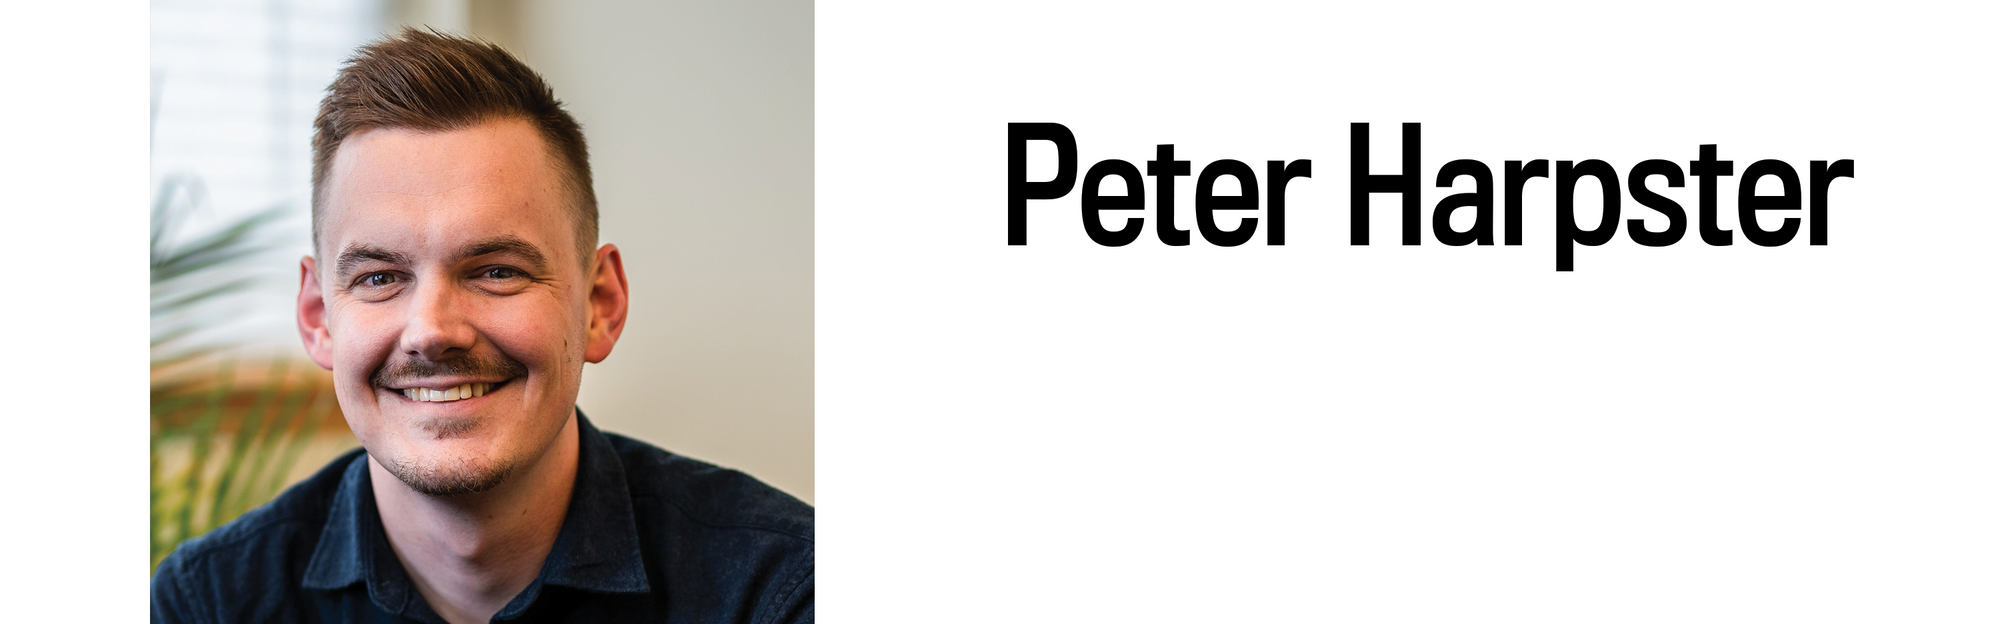 A headshot and header for Peter Harpster